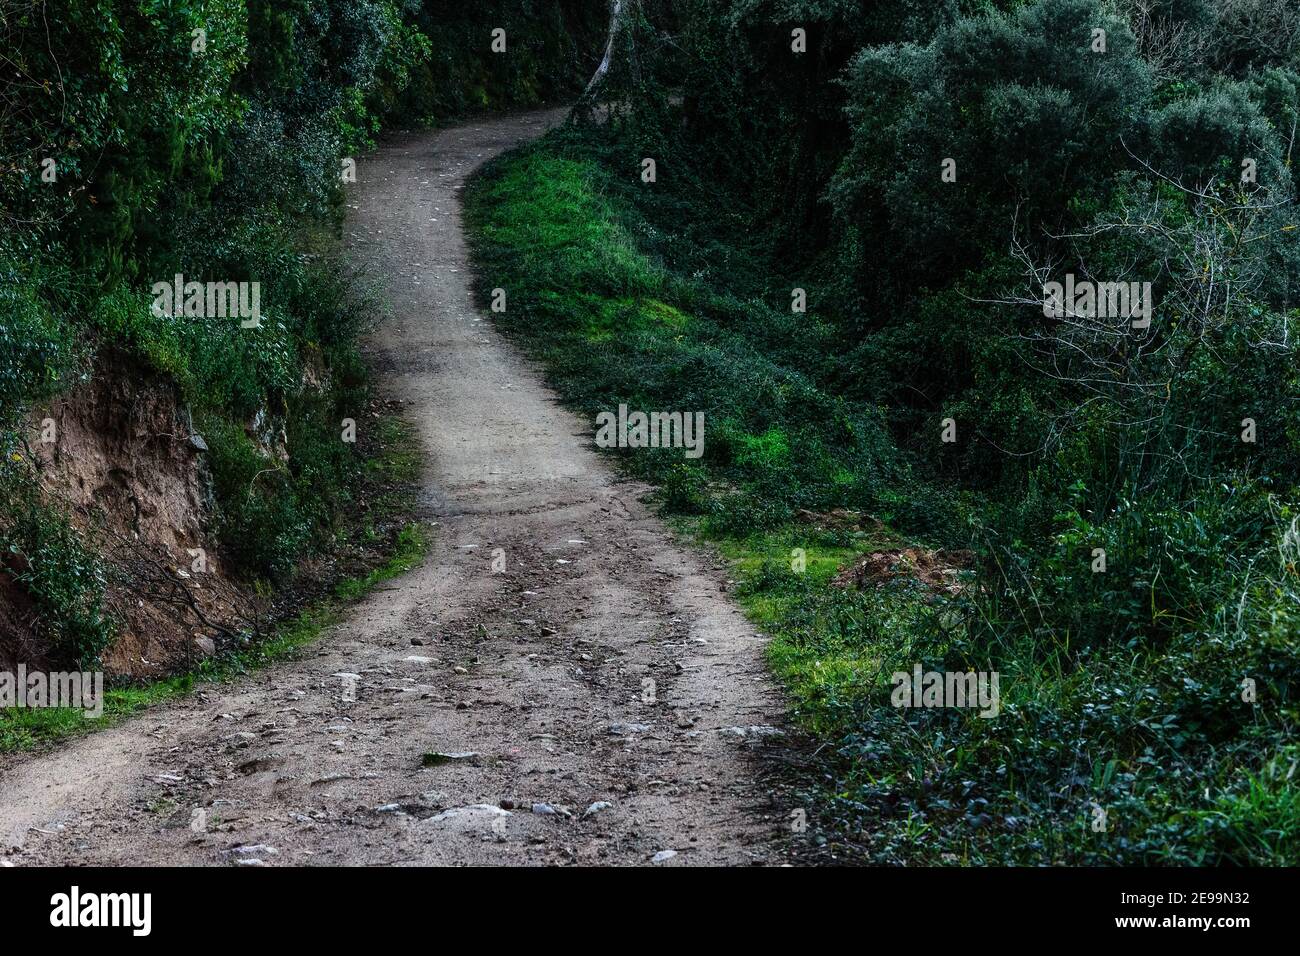 A winding walking path in the hills surrounded by thick green trees. Stock Photo